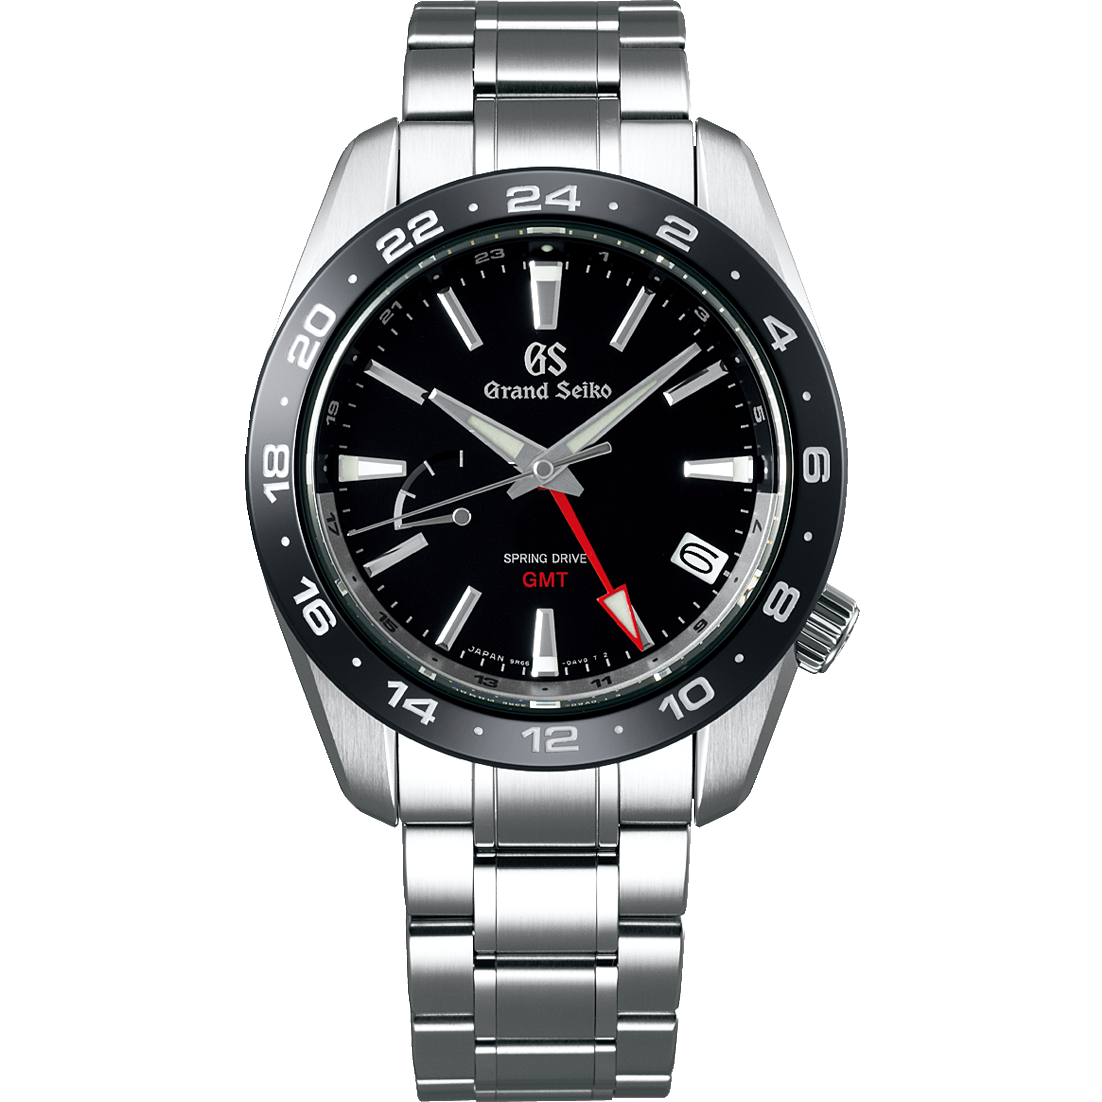 SBGE253G - Spring Drive GMT with Ceramic Bezel – GRAND SEIKO INDIA